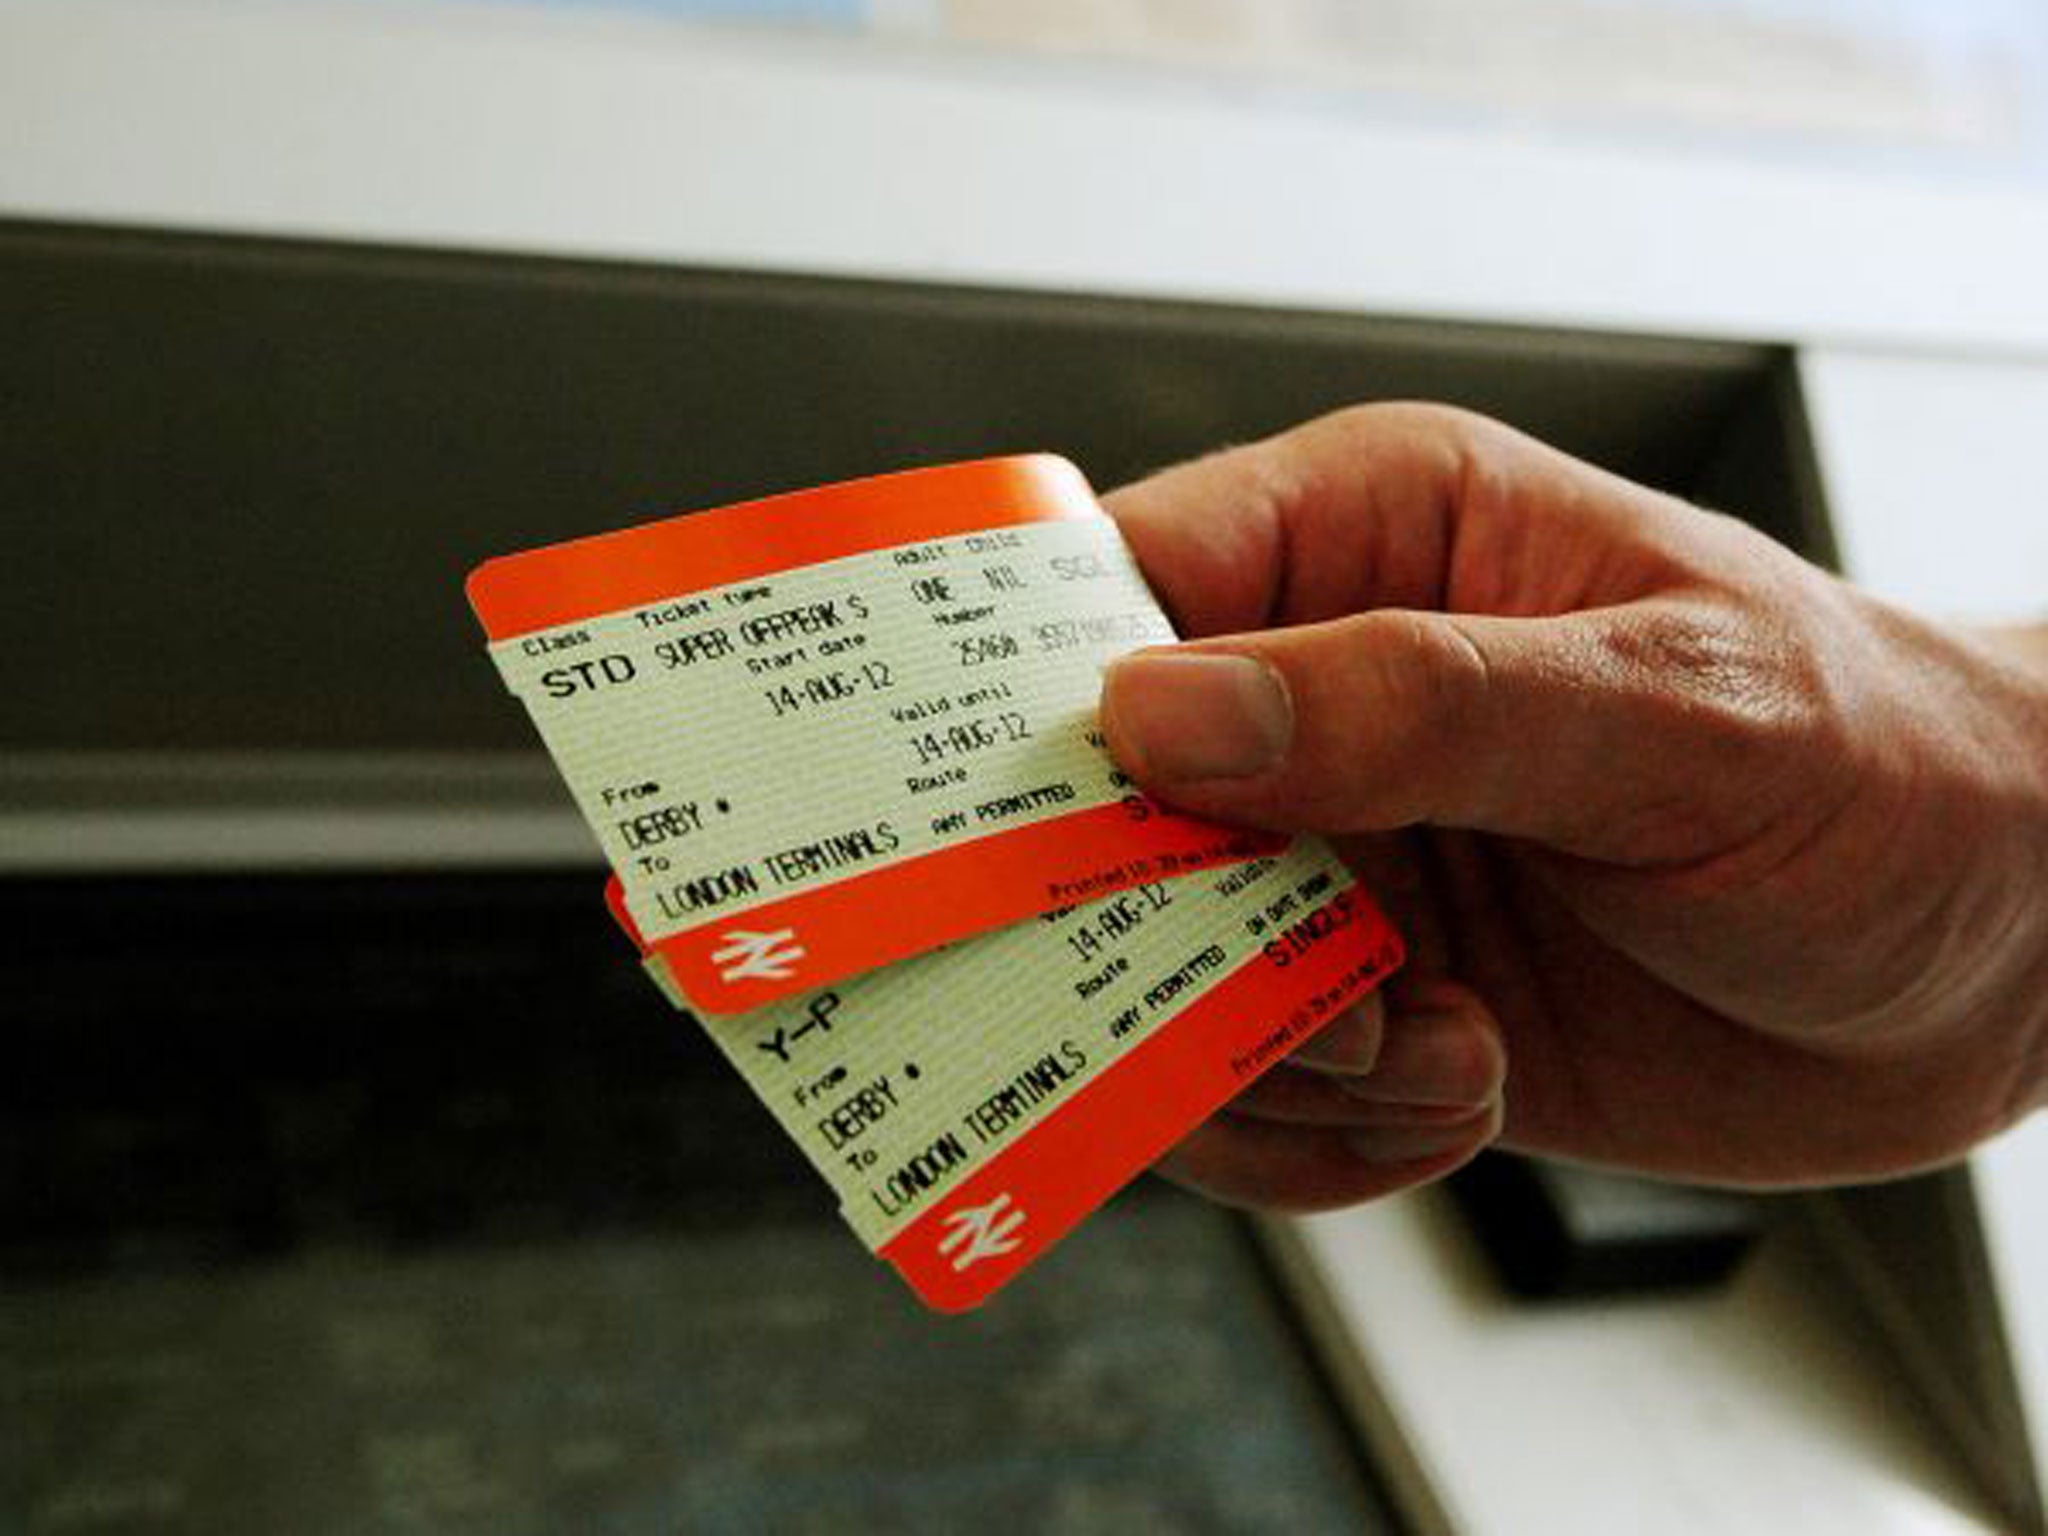 The increase means fares are rising three times faster than wages for many commuters